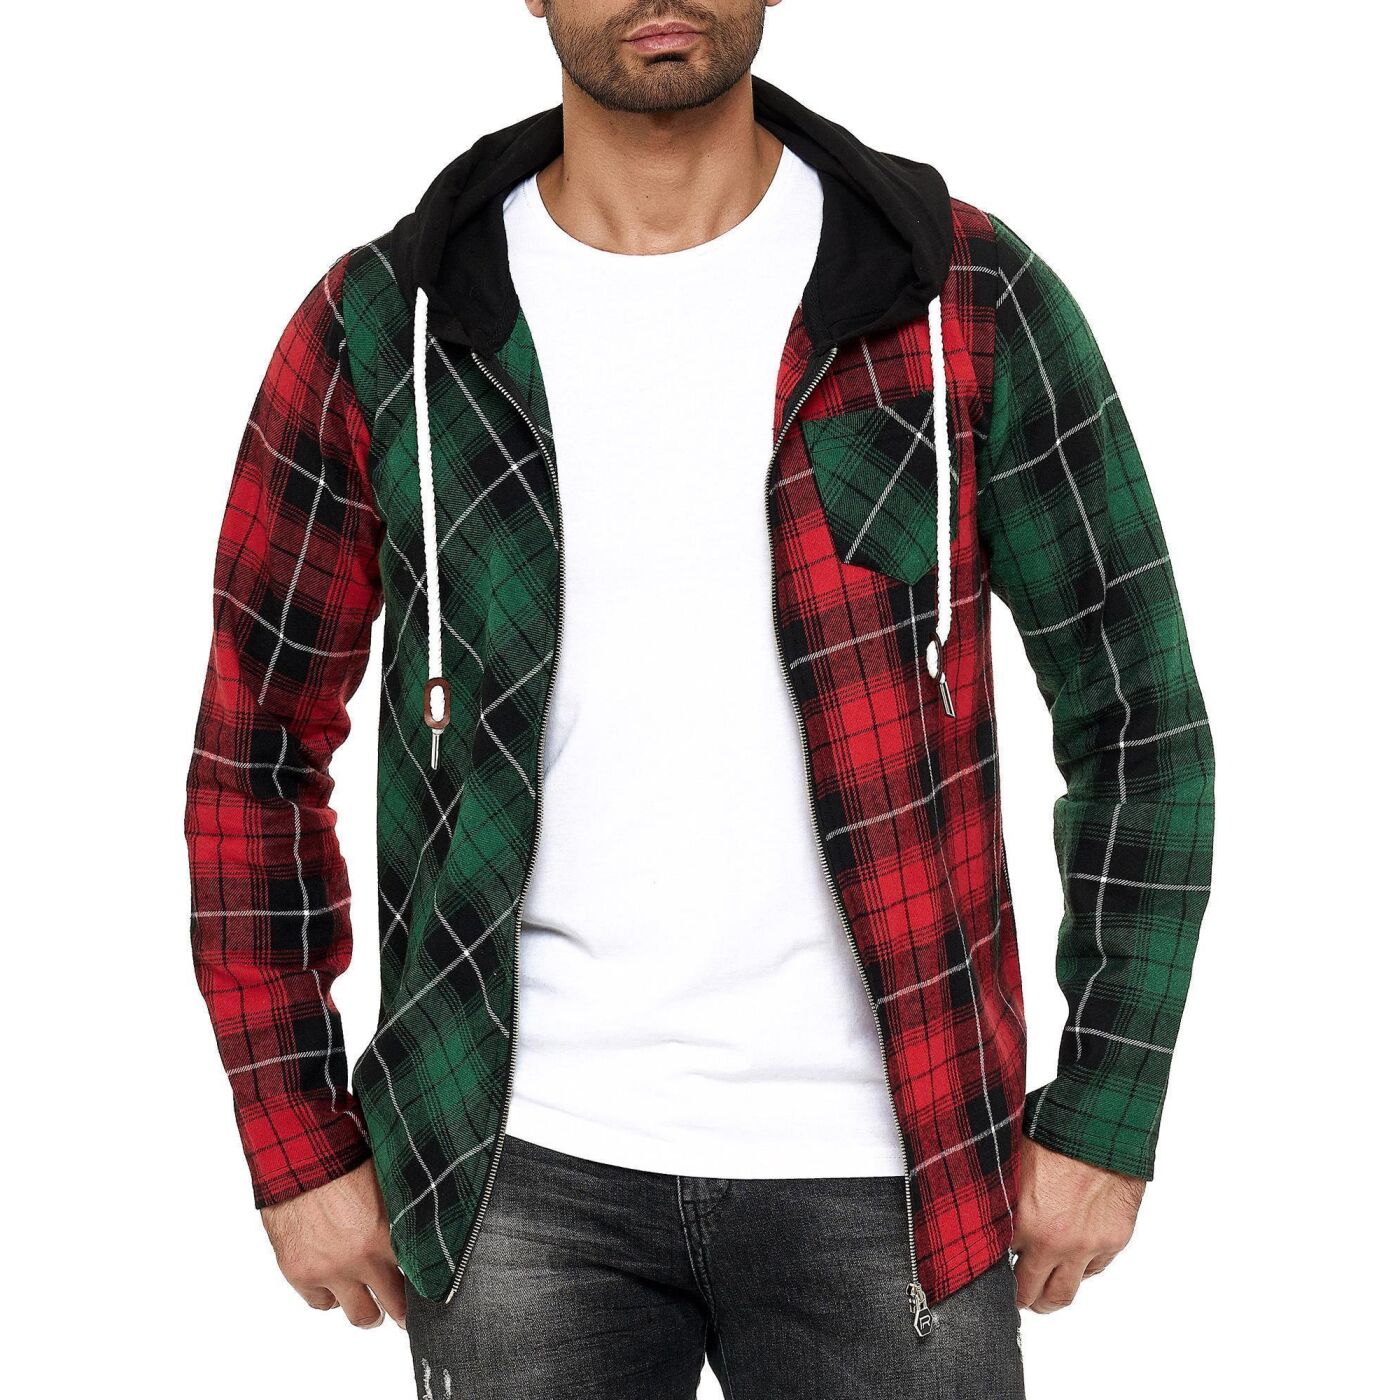 € checkere, Jacket Pullover Sweatshirt 44,90 Sweat mens with Bridge Red hooded